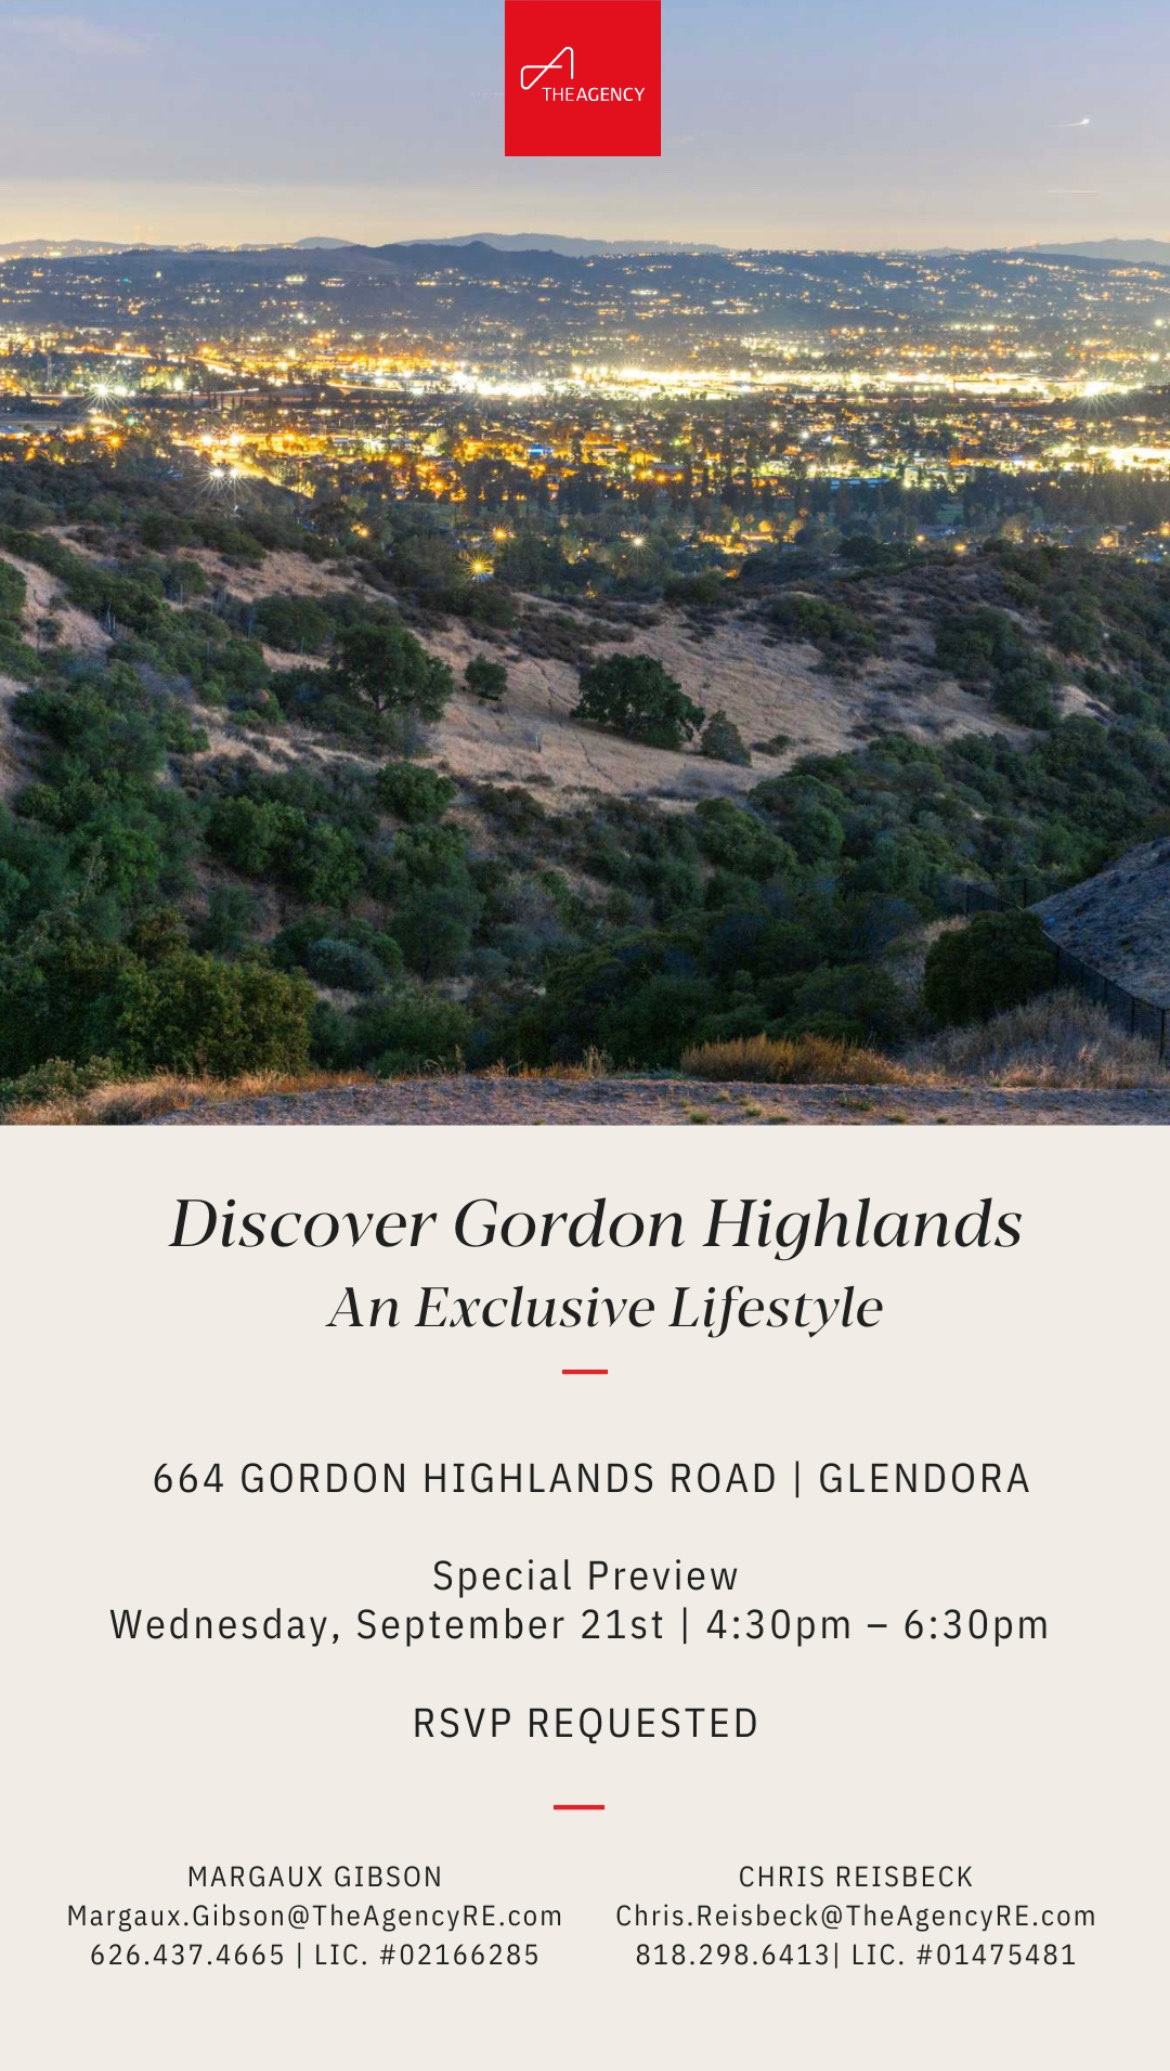 Margaux Gibson Gordon Highlands event flyer showing view of the valley with lights on in homes below 